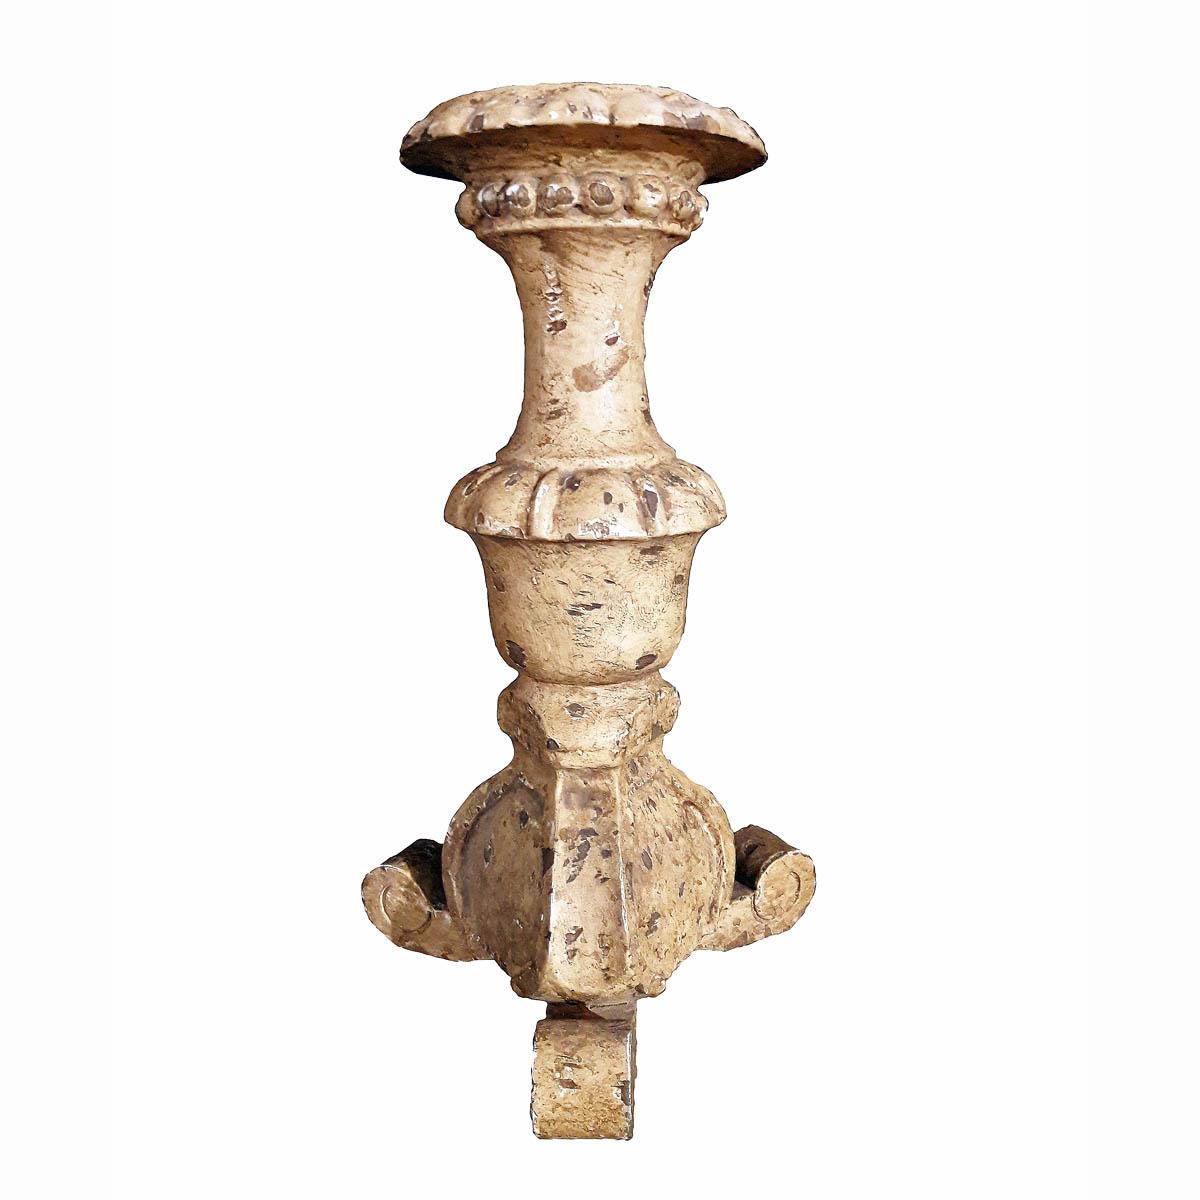 A charming candleholder, hand carved in wood and polychromed in natural color. From India. Rustic style, circa 1970. Three available, sold separately.